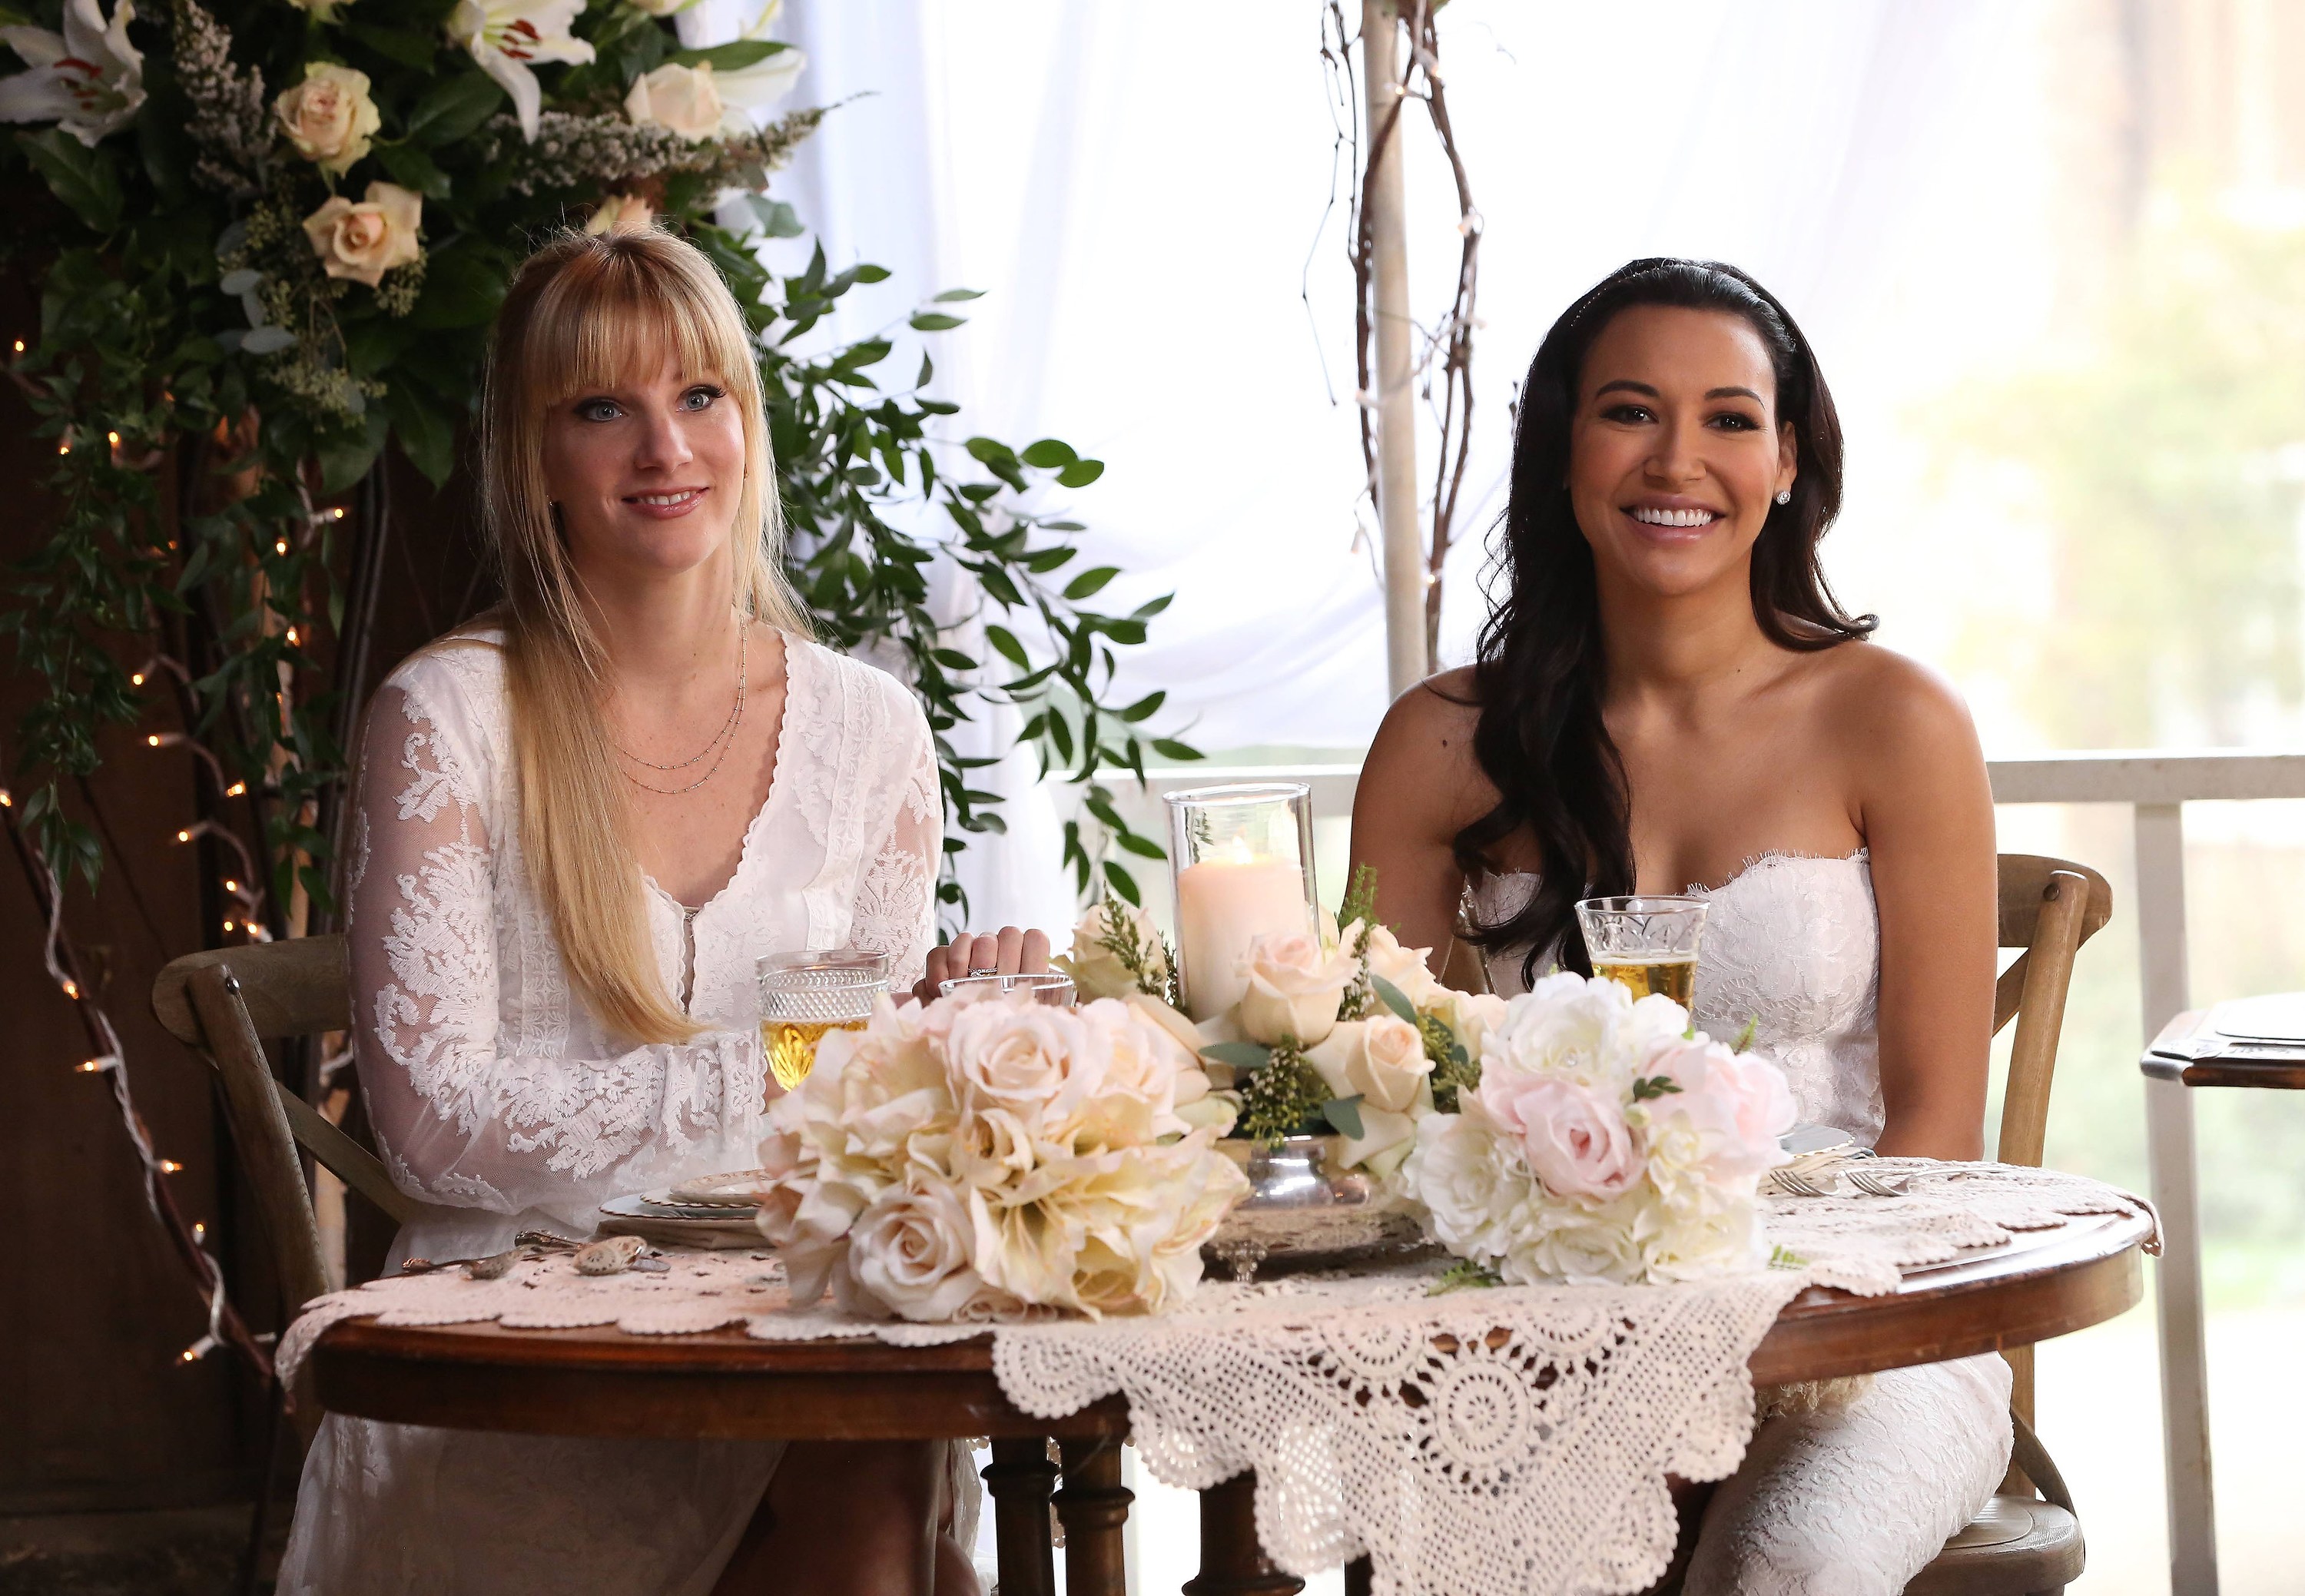 Santana (Naya Rivera, R) and Brittany (Heather Morris, L) tie the knot in 'Glee' episode 'A Wedding